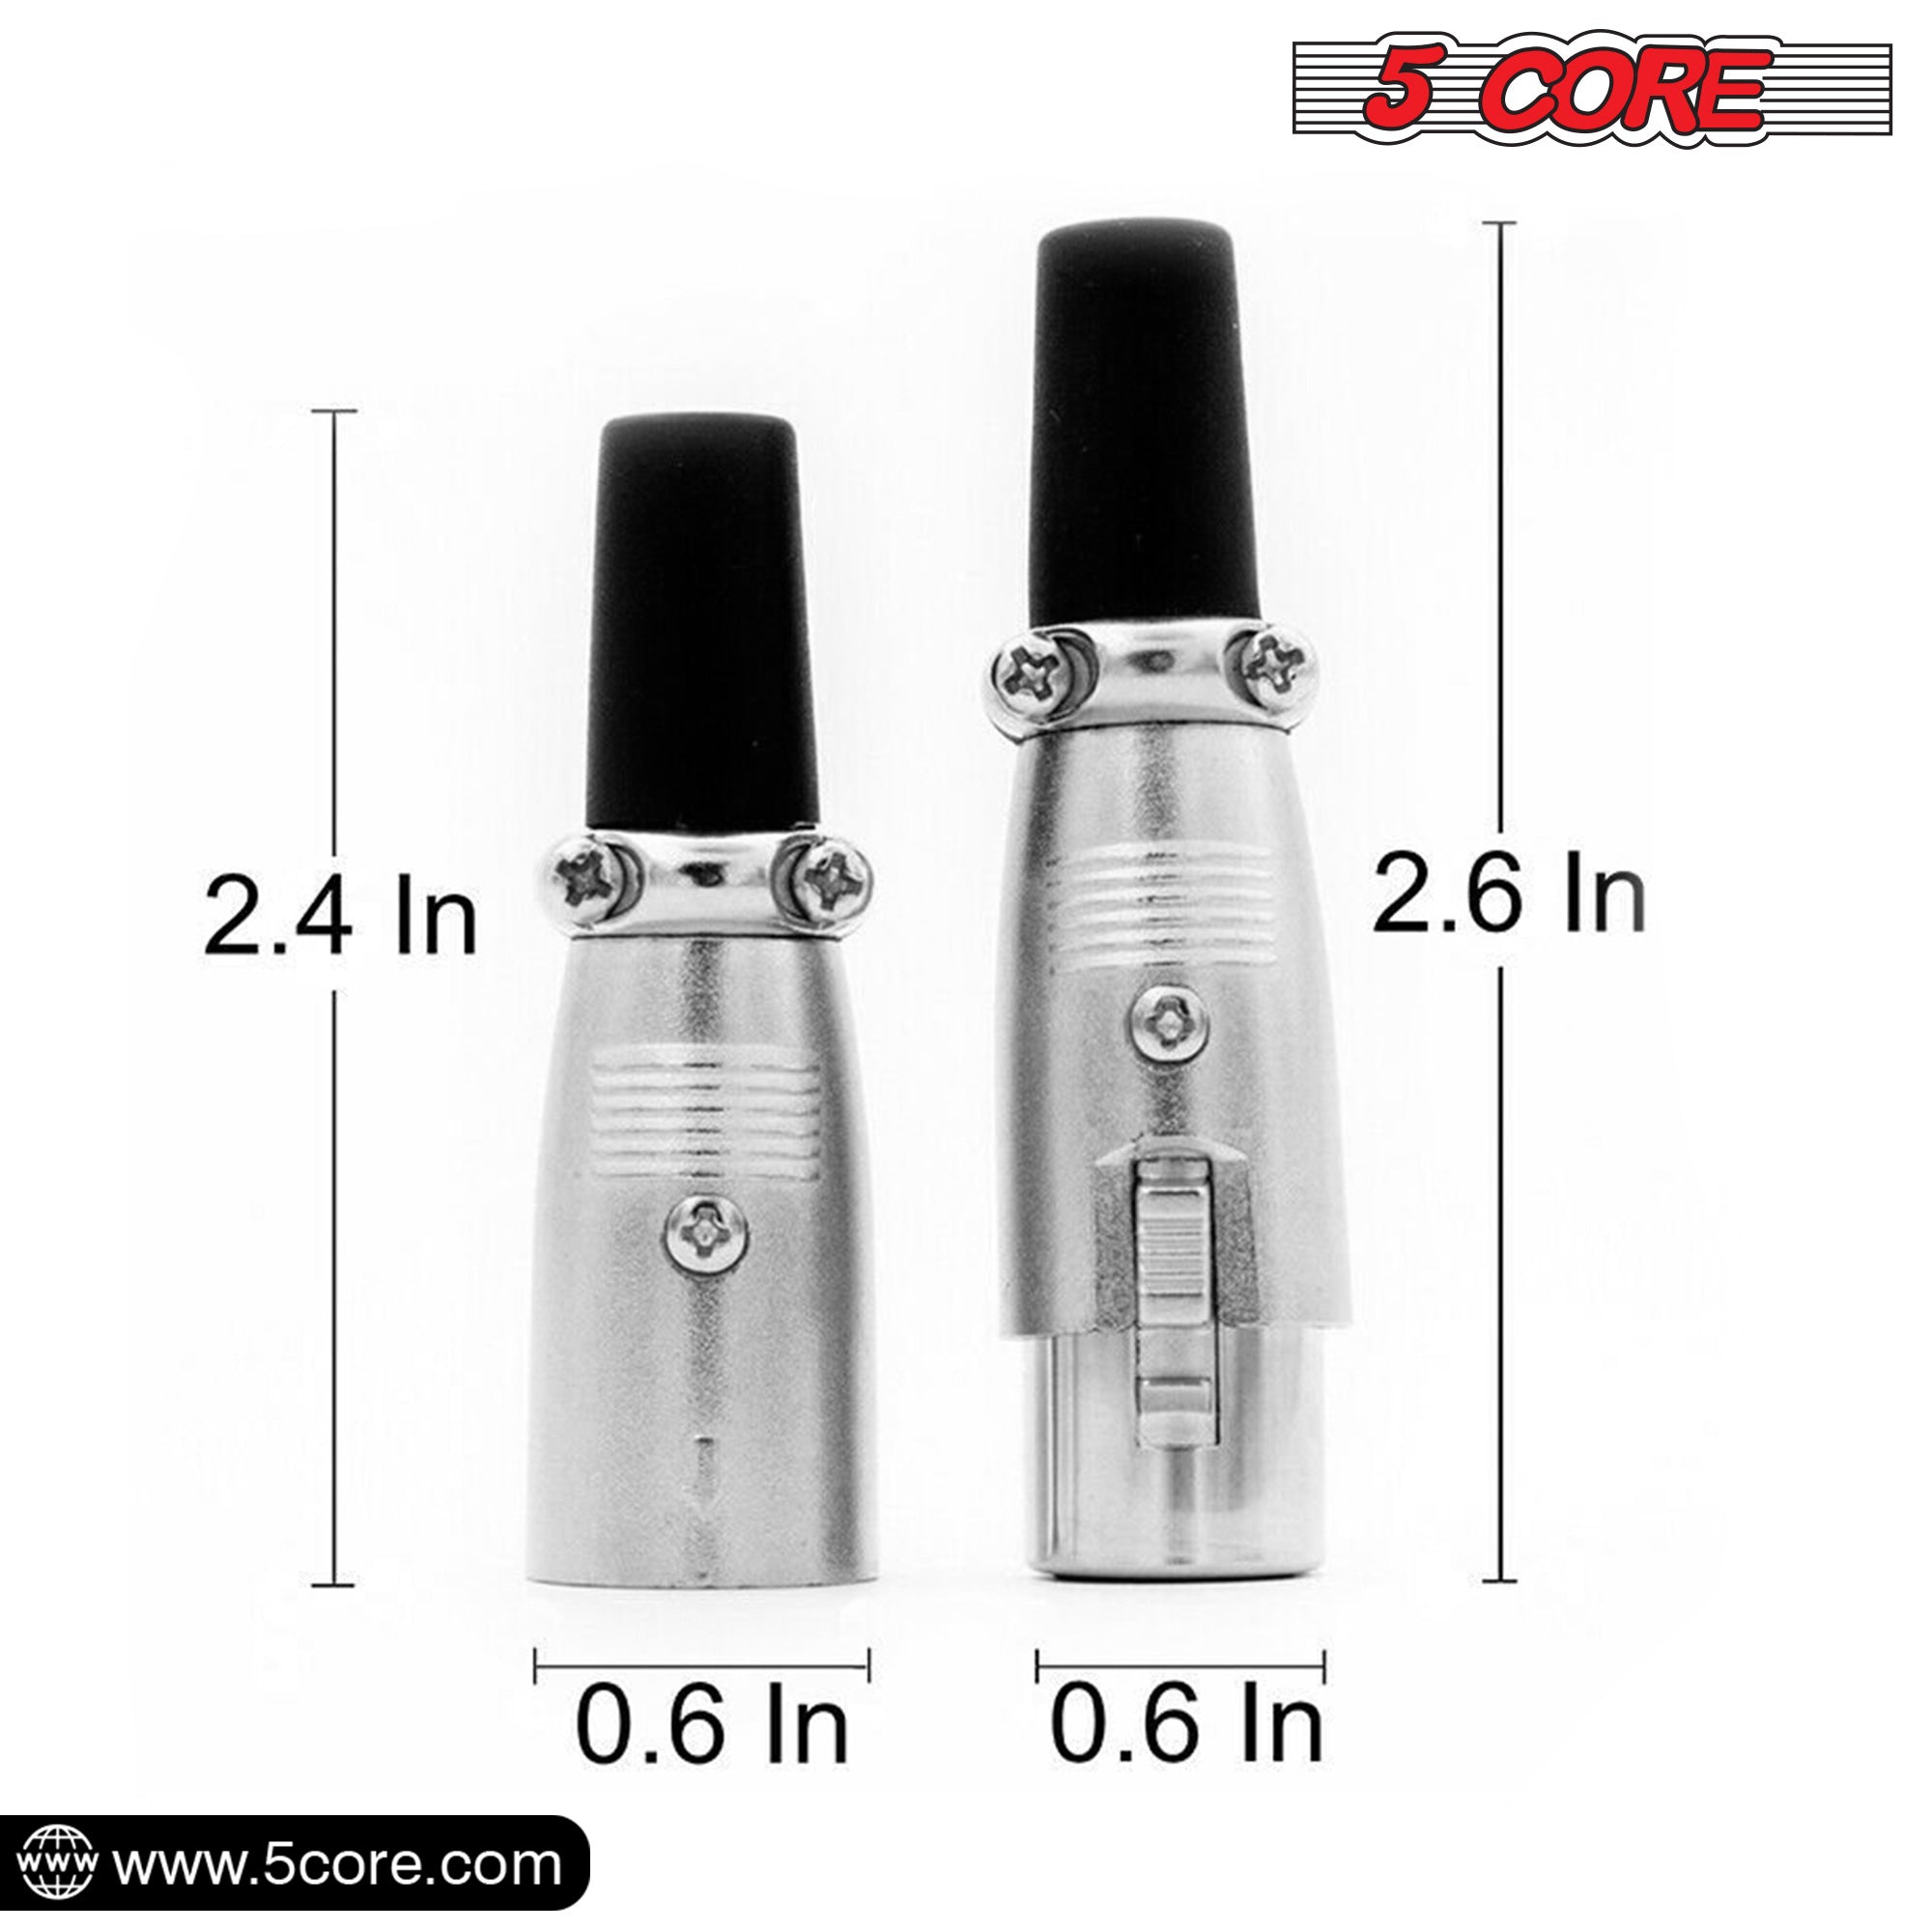 5 Core XLR 3 Pin Female to XLR Male 10Pack • Connector Microphone Line Plug Adapter • w Lock Button